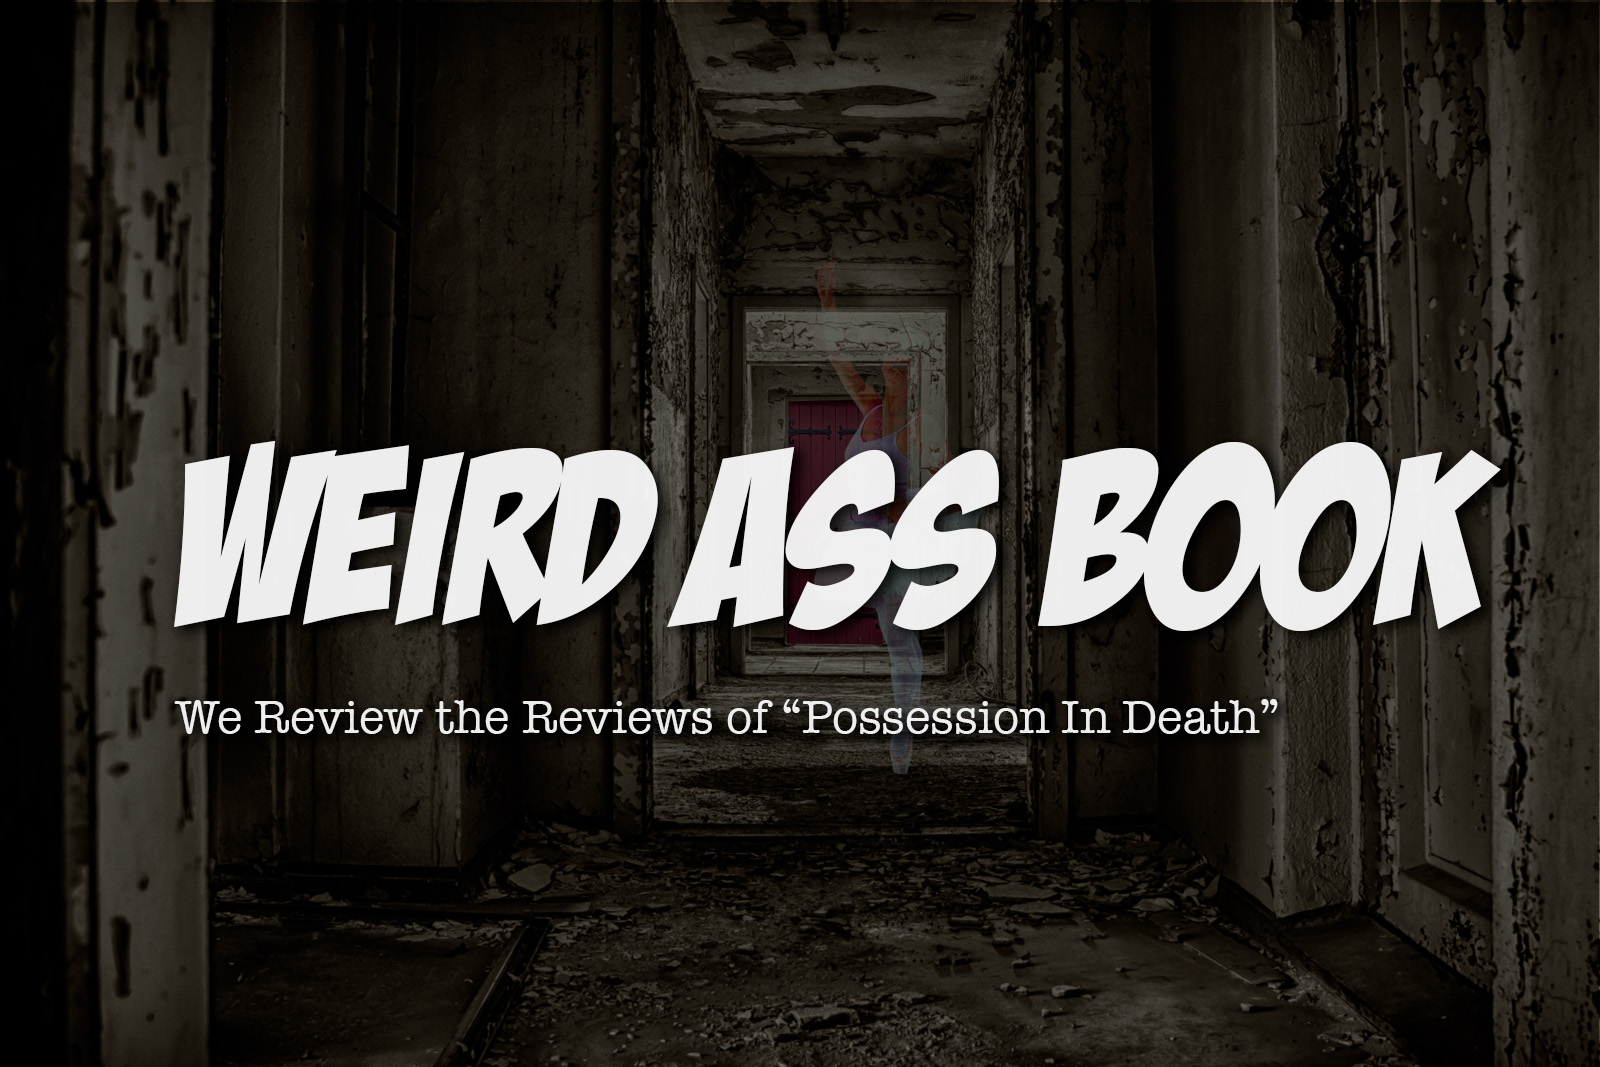 Weird Ass Book: We Review the Reviews of “Possession in Death”